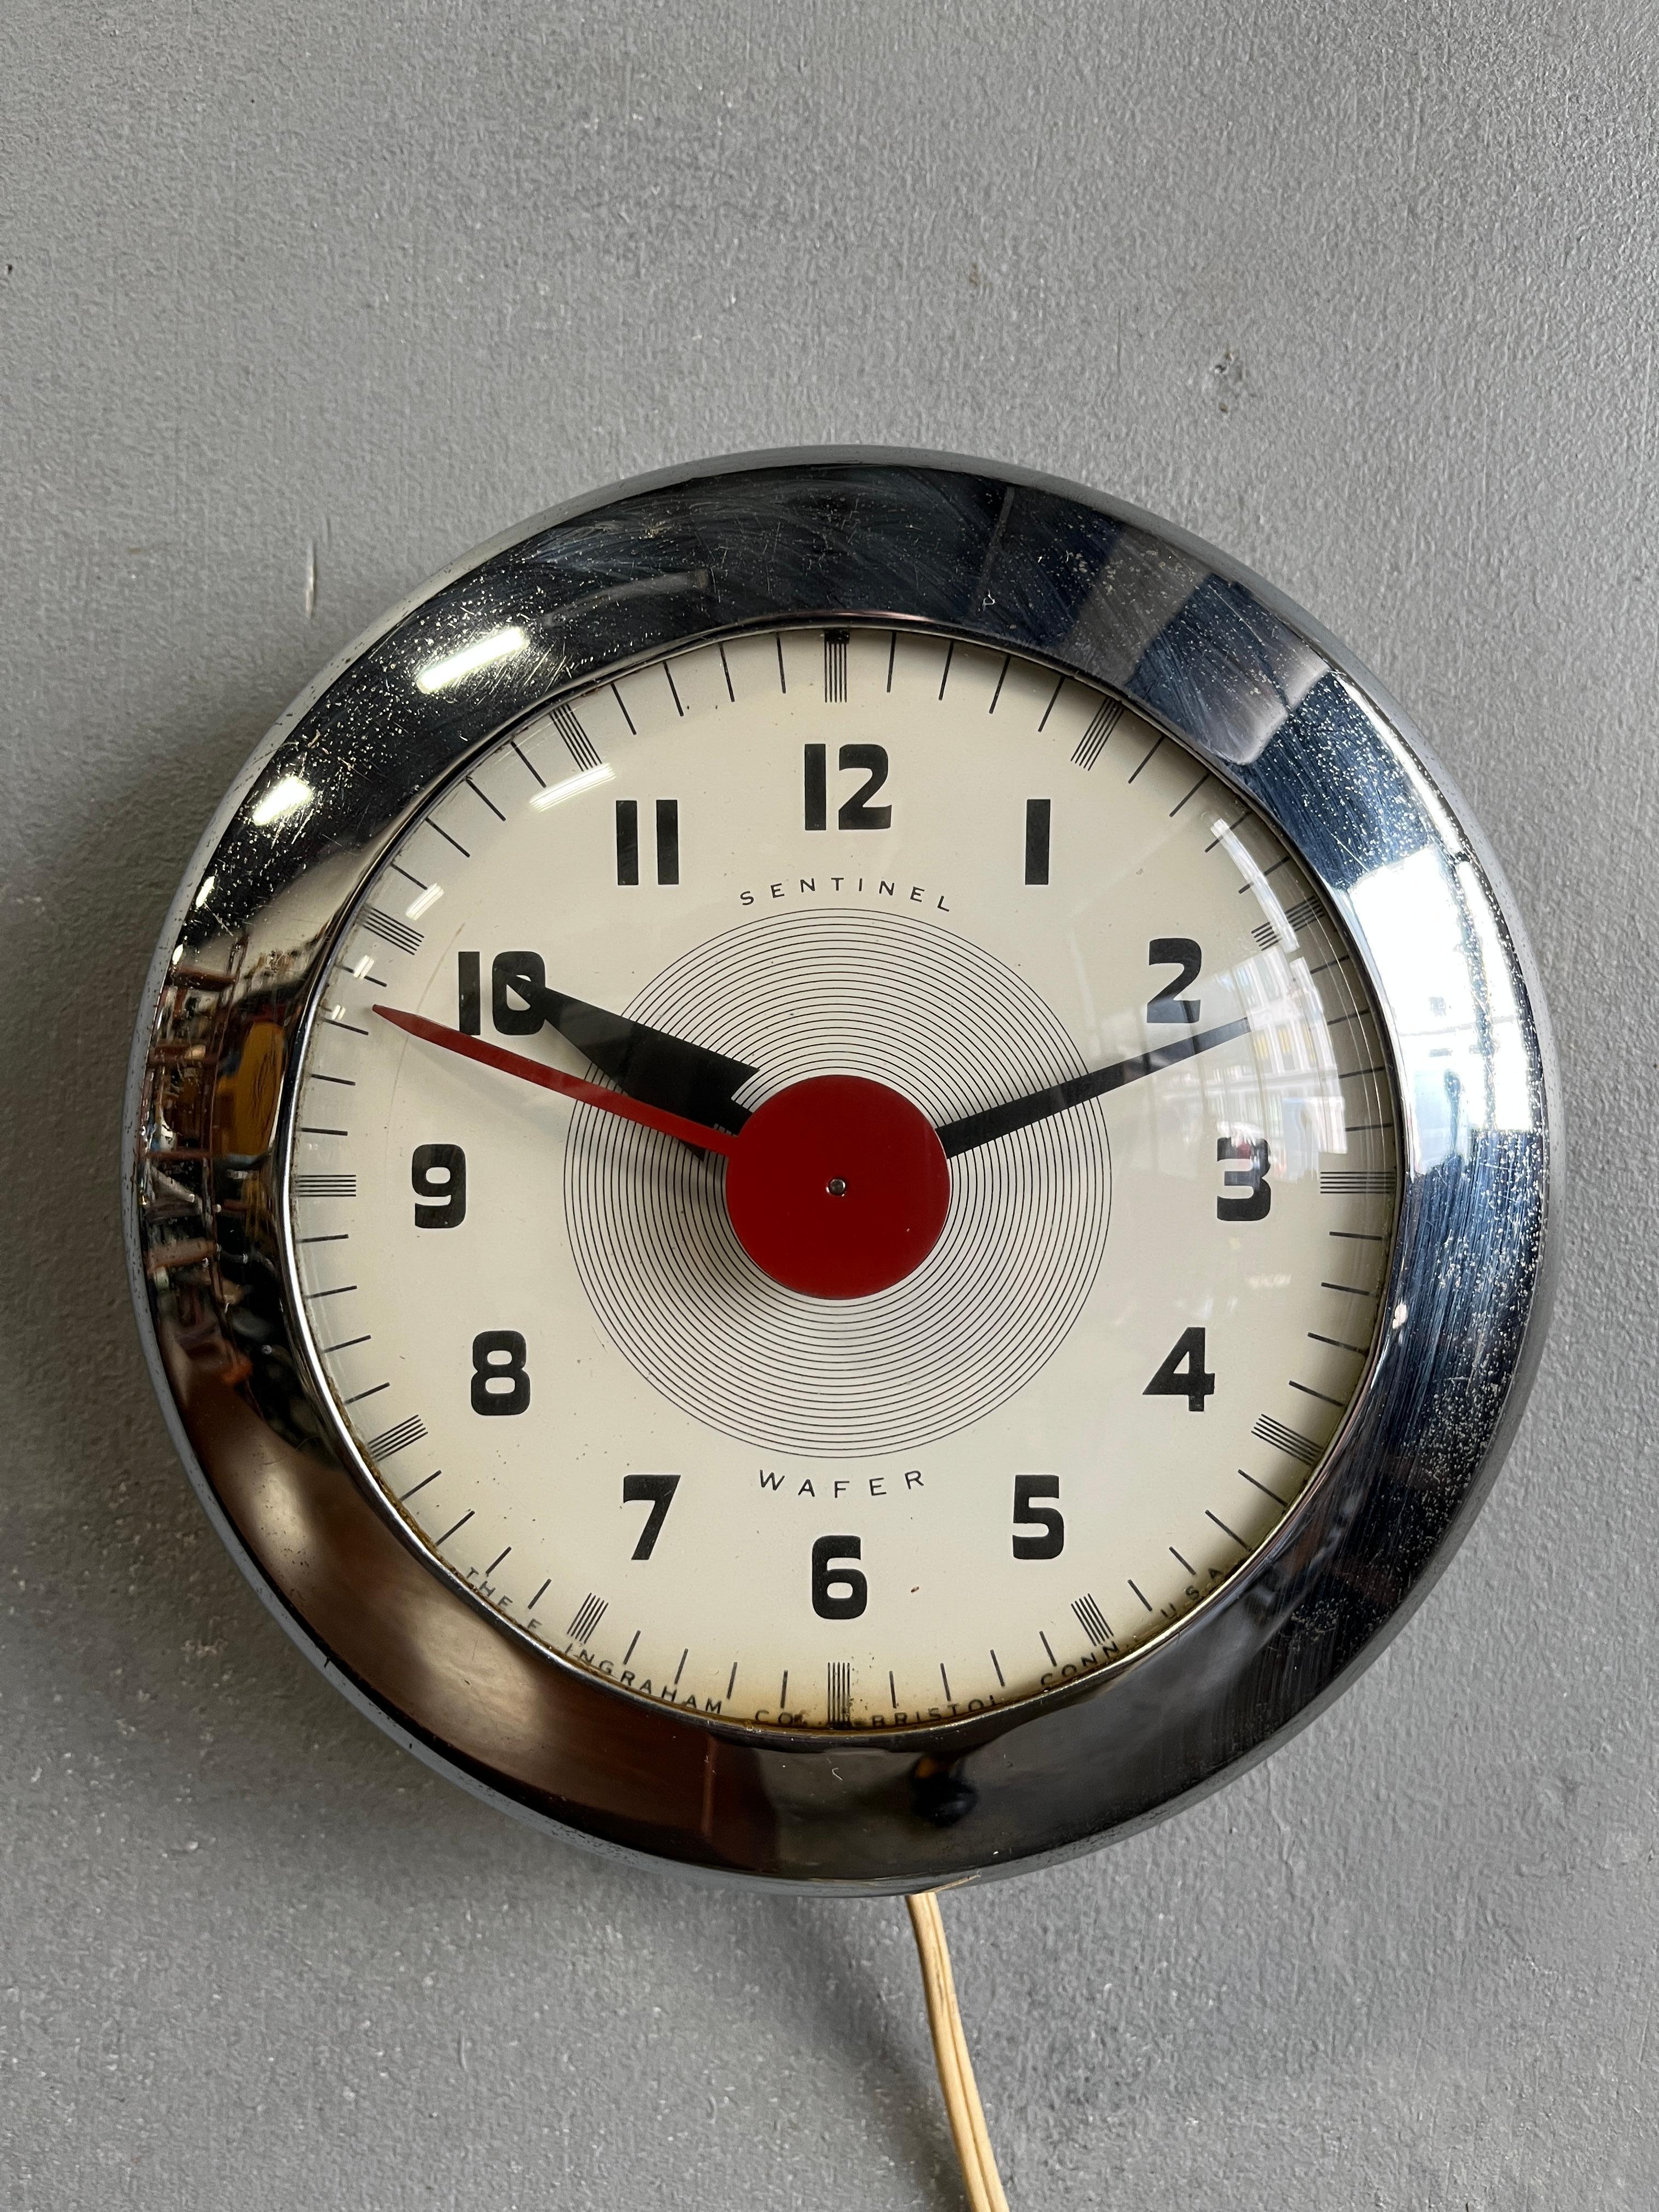 Highly graphic chrome wall clock with classic 50's details. Sweeping hand movement on this wonderful clock designed by one the greatest industrial designers of this century.